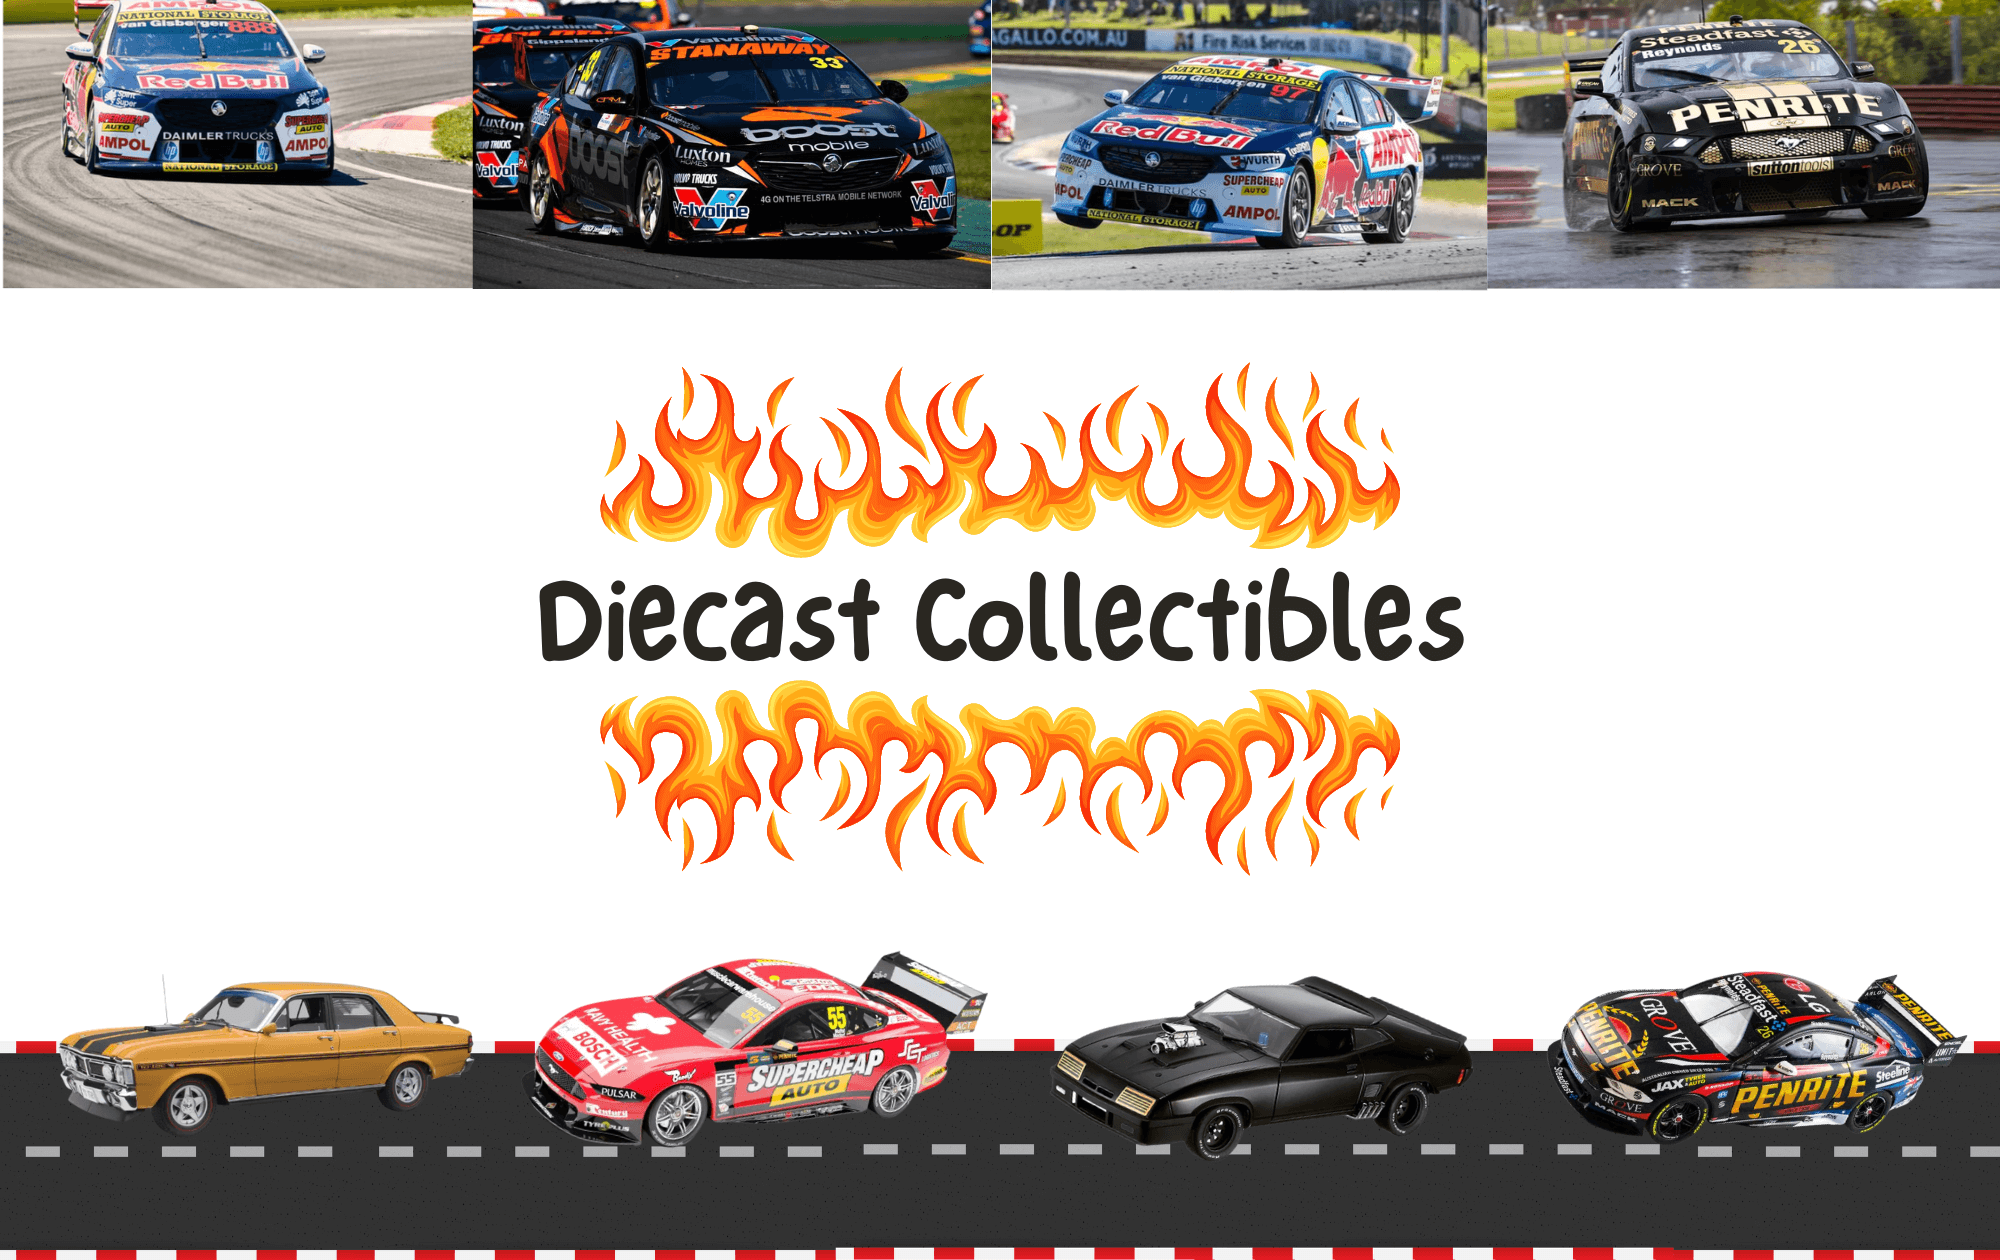 Diecast collectibles title with flames. Race car photos and race car toy products.